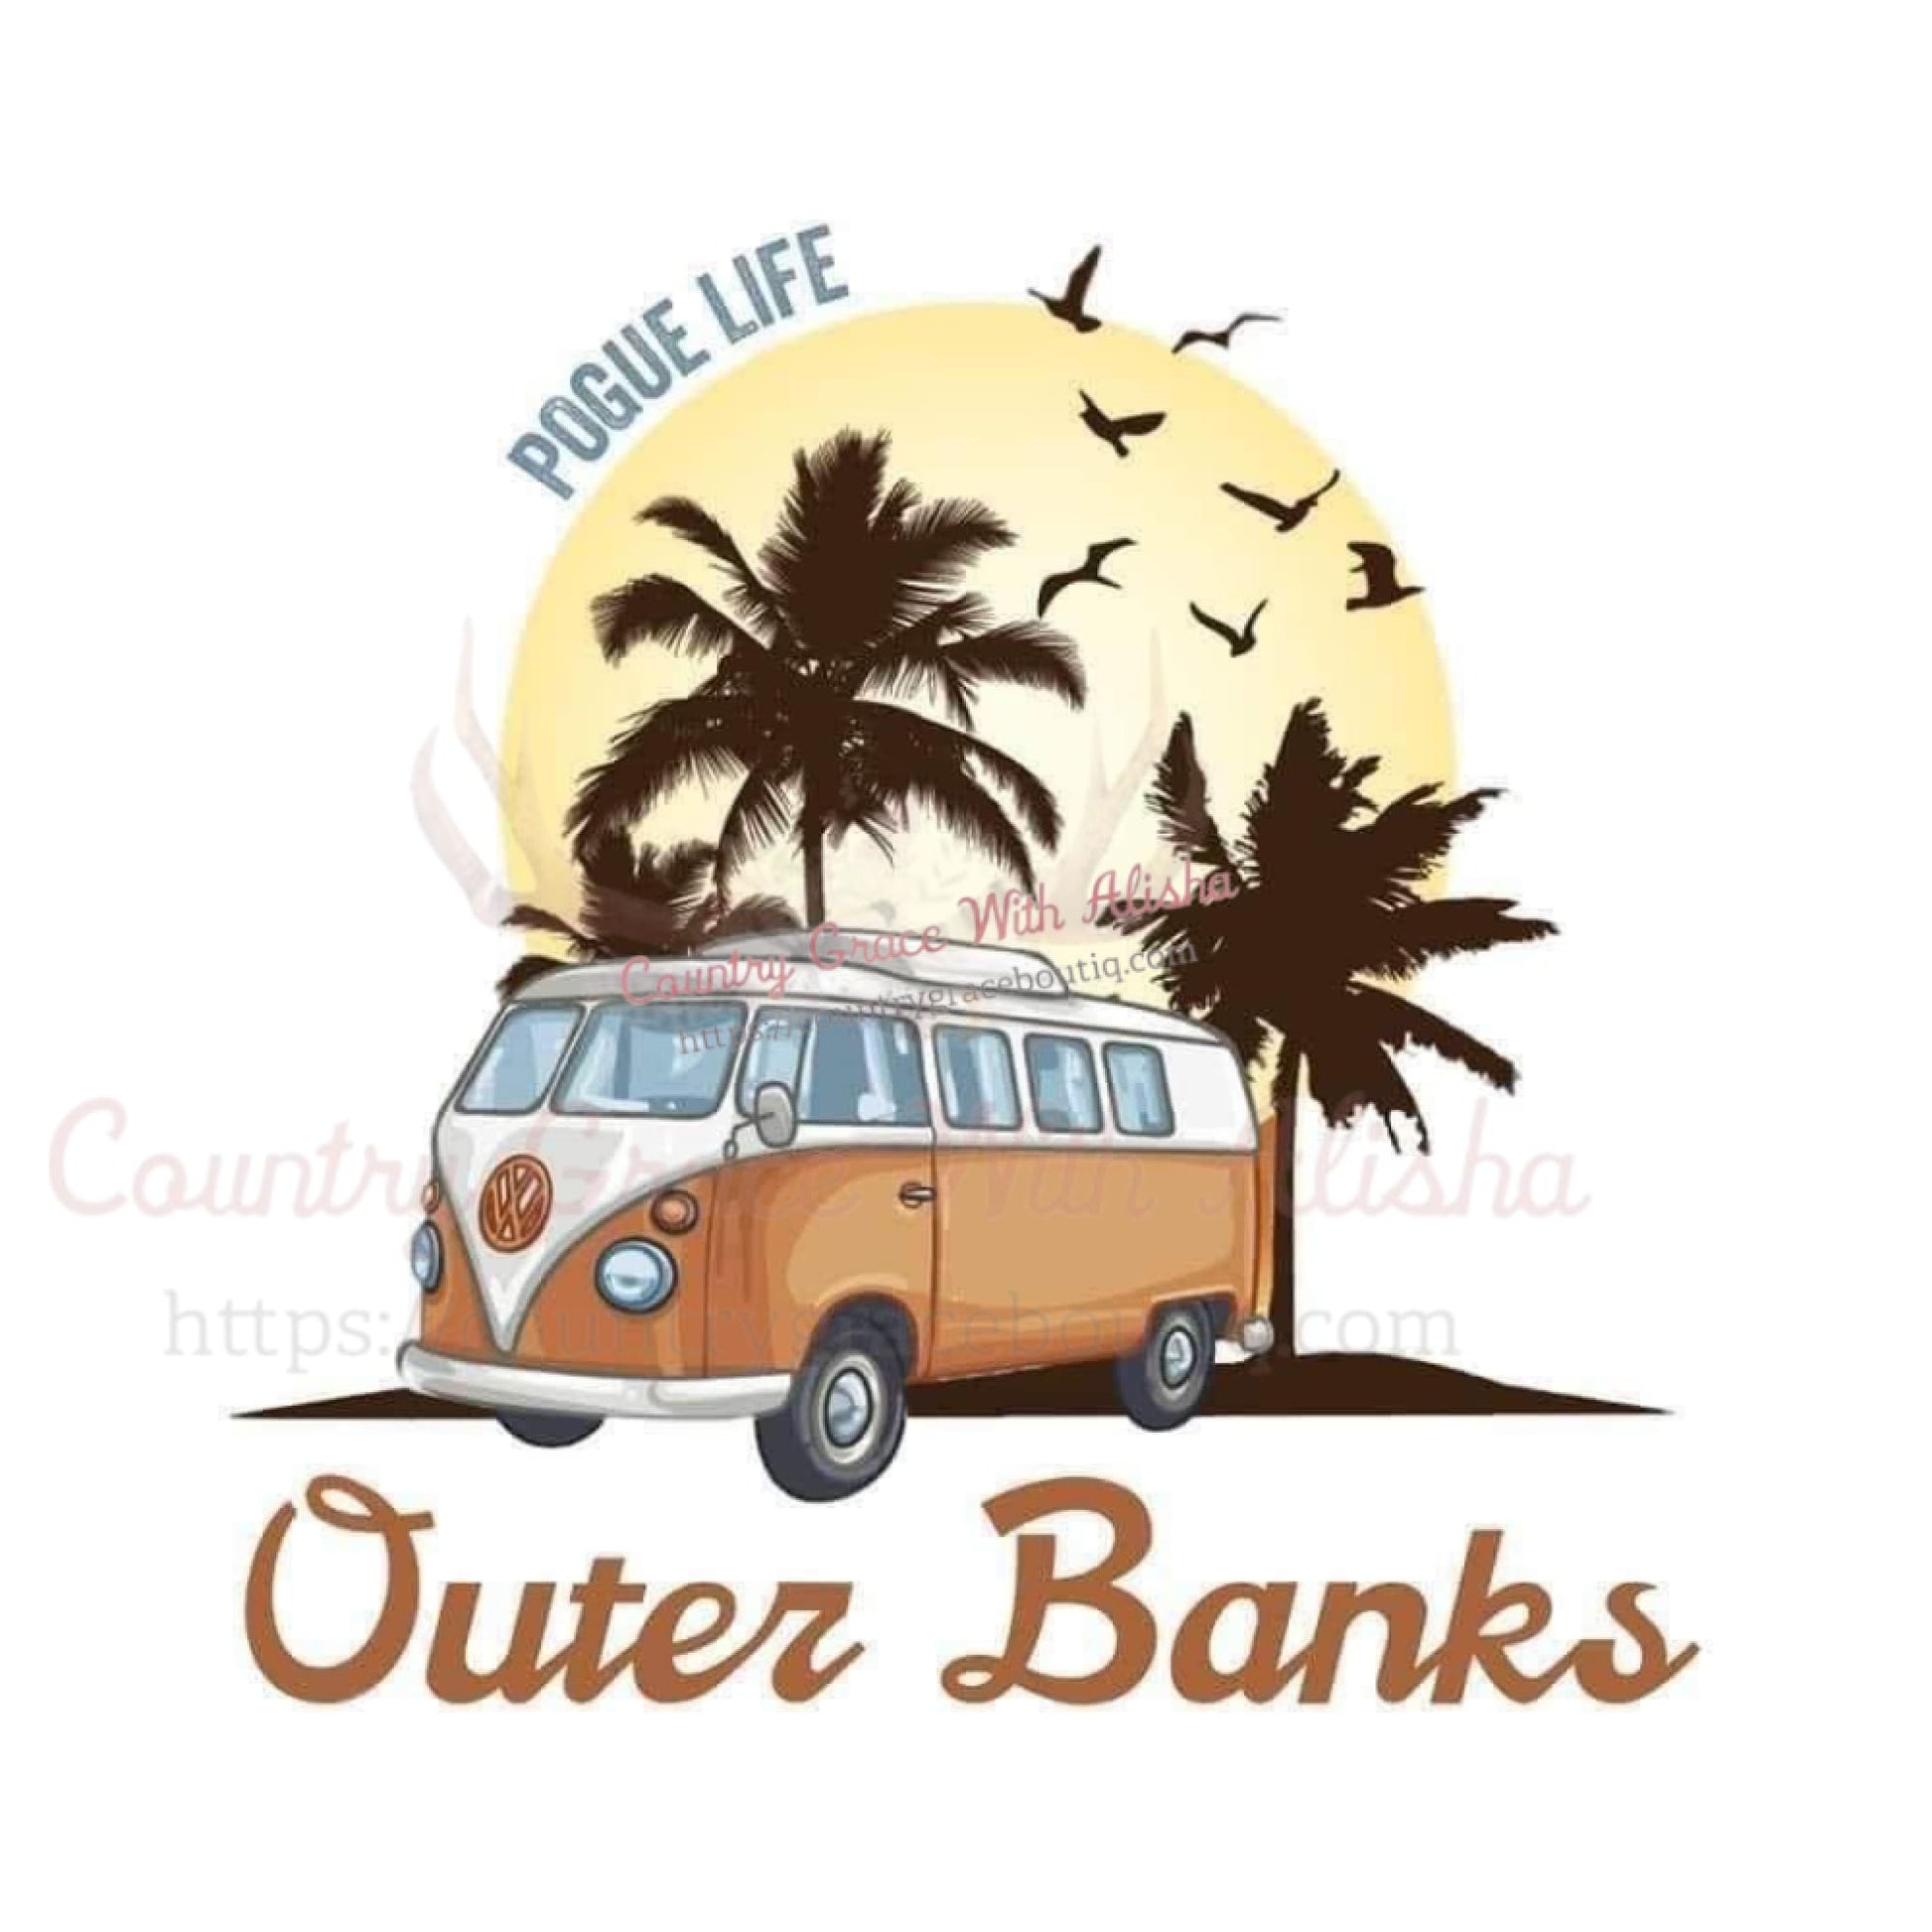 Outer Banks Sublimation Transfer - Sub $1.50 Country Grace 